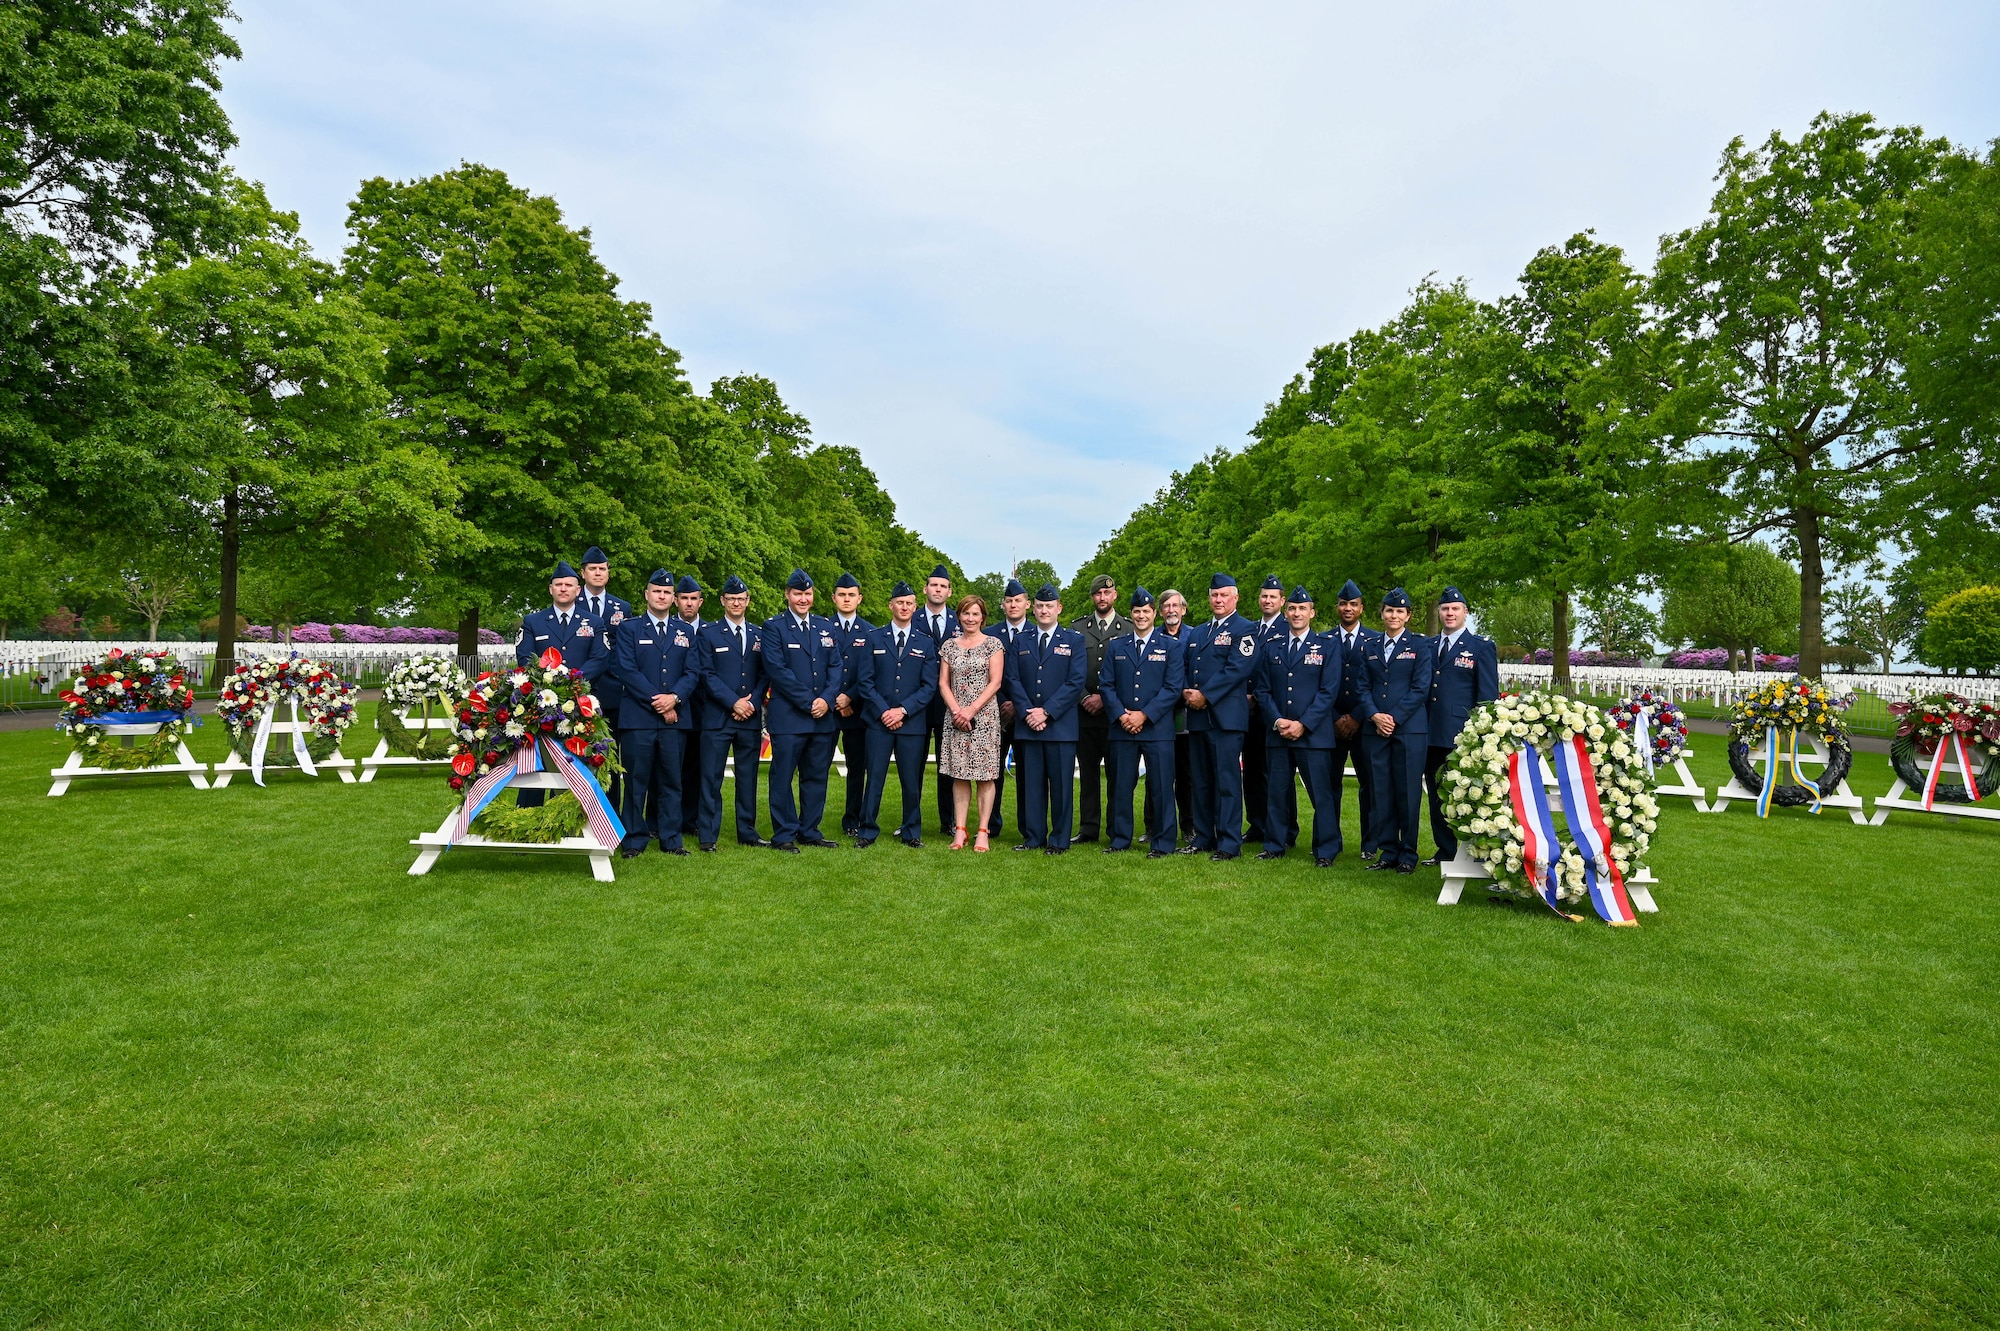 A group of people in their dress blue uniforms pose for a photo with a woman in the center in a tan dress. The group is in front of a variety of memorial wreaths at a memorial cemetery